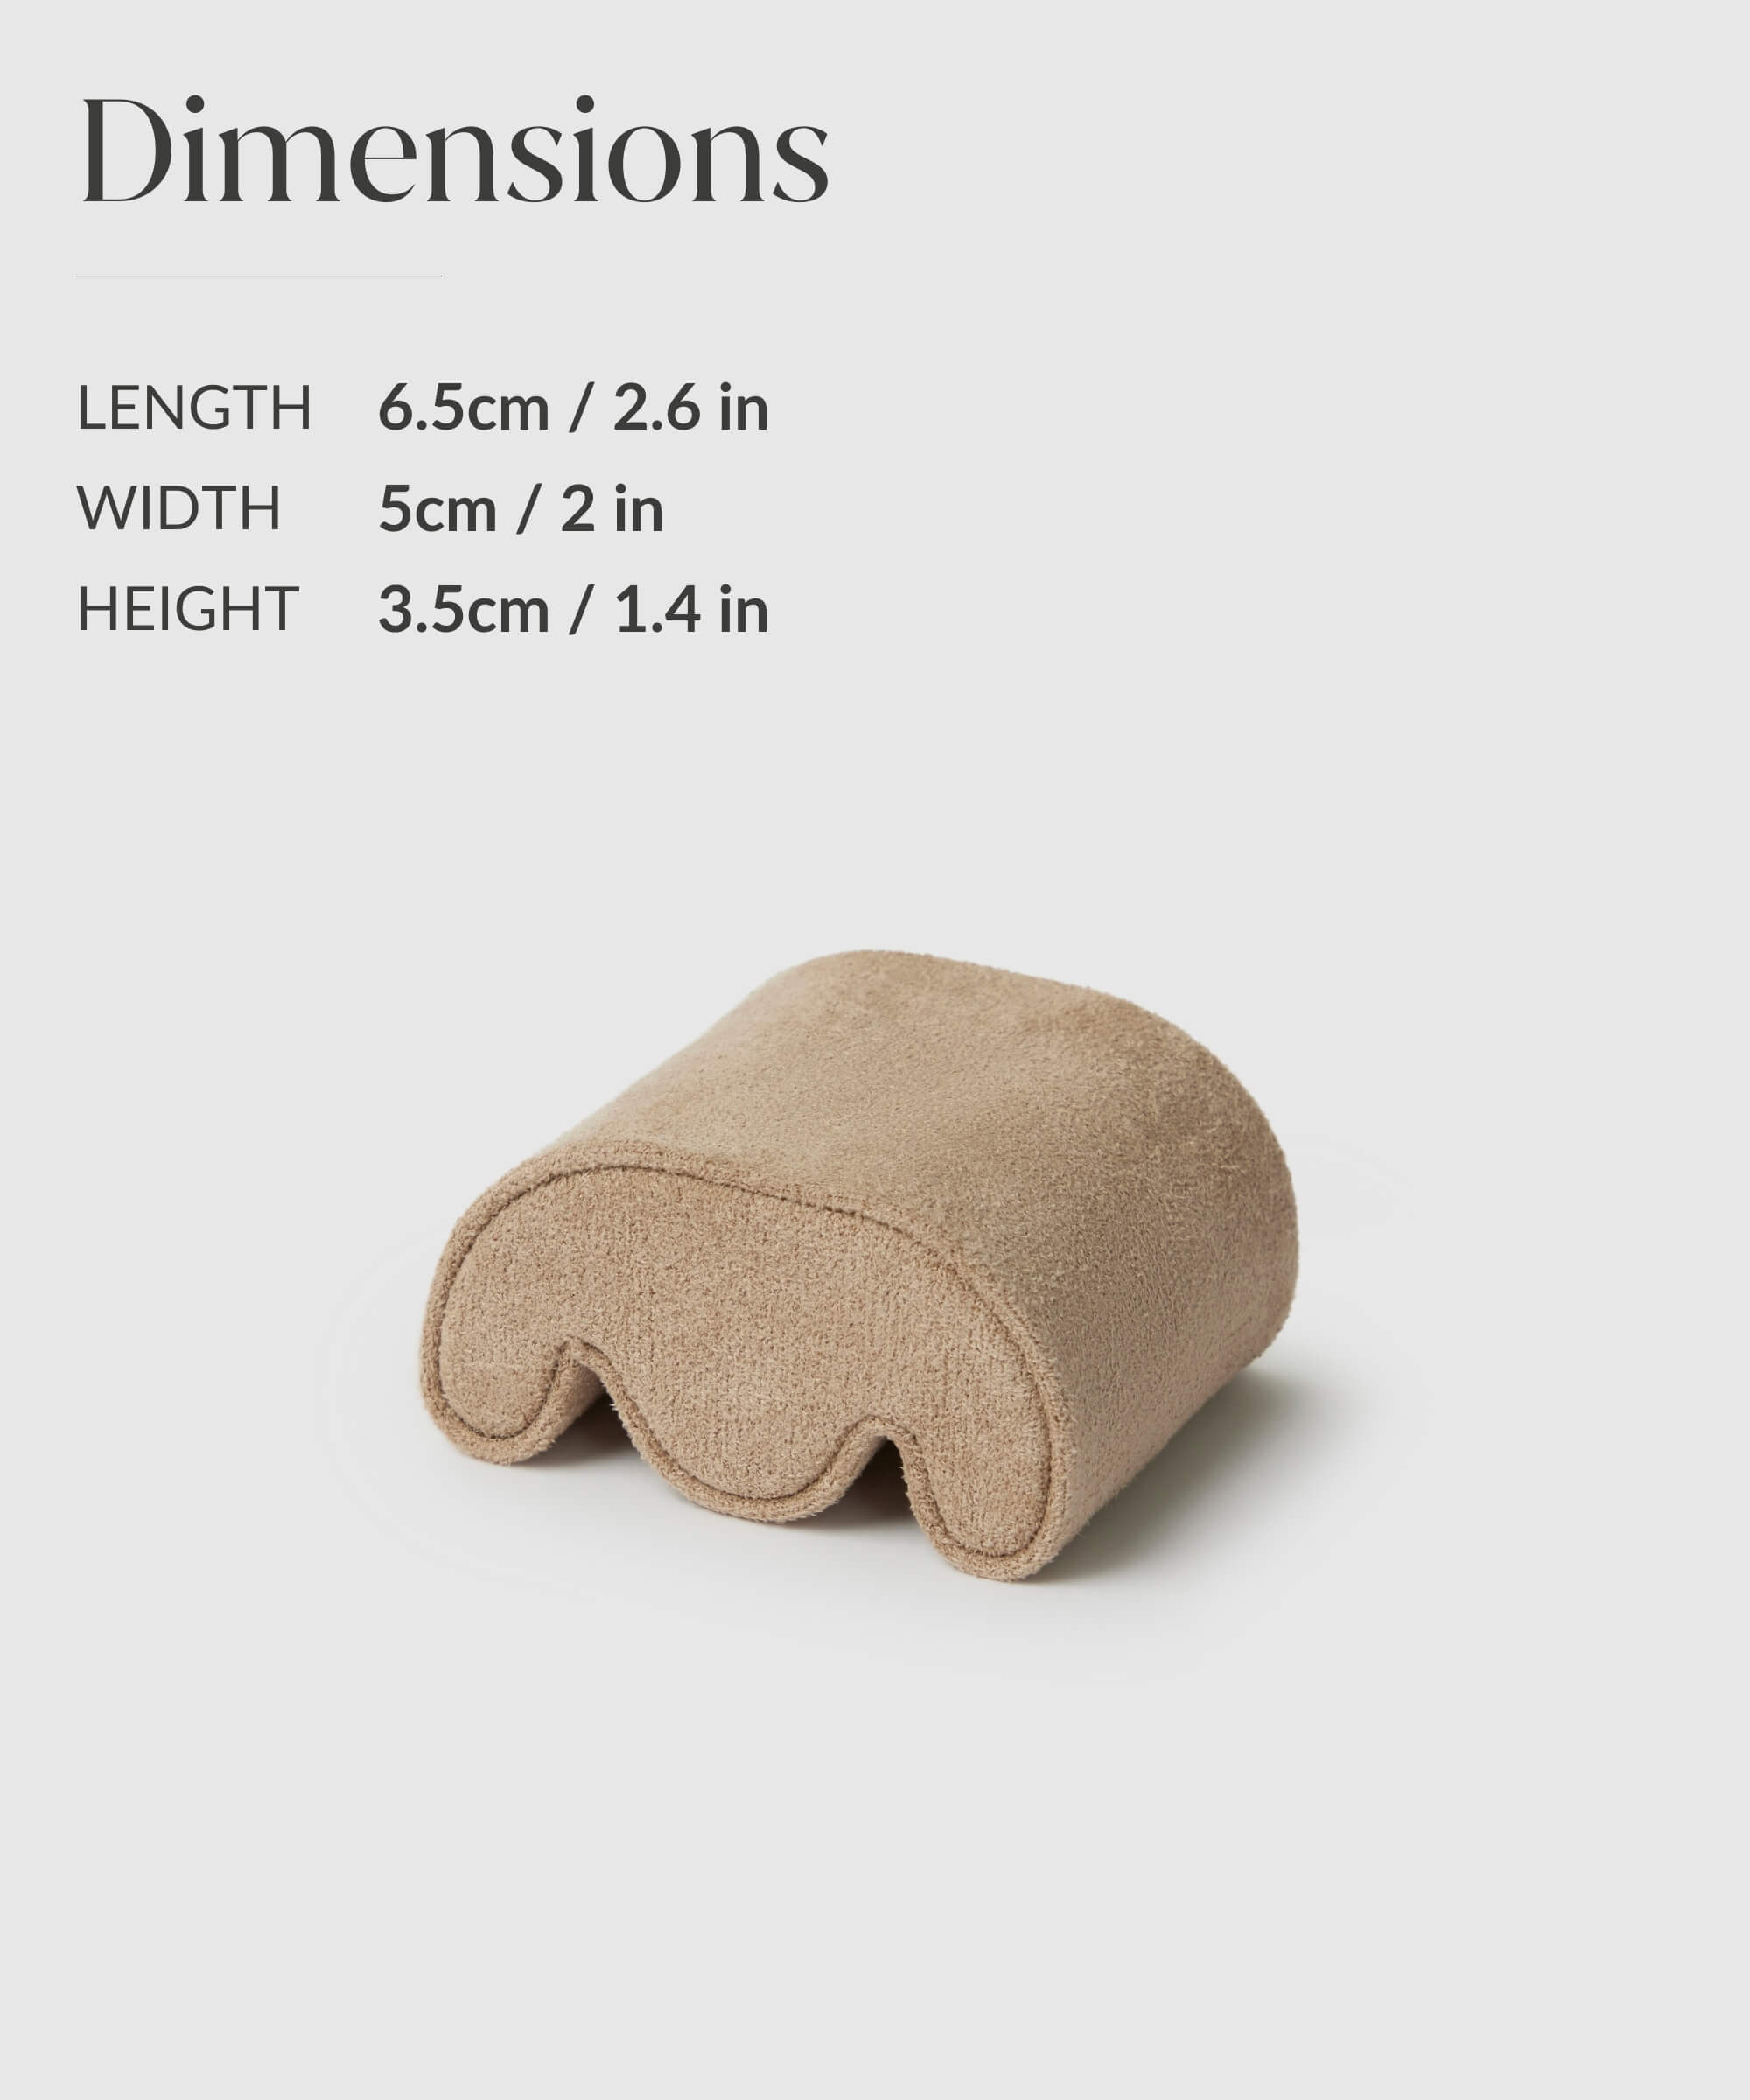 A small, beige, arch-shaped object with listed dimensions: 6.5 cm length, 5 cm width, and 3.5 cm height, perfect for slender wrist pillows ranging from wrist size 14-16.5cm.

Replace with:
The TAWBURY Grove Replacement Watch Box Pillows - X-Small - Cream is a small, beige, arch-shaped object with listed dimensions: 6.5 cm length, 5 cm width, and 3.5 cm height; perfect for slender wrist pillows ranging from wrist size 14-16.5cm.